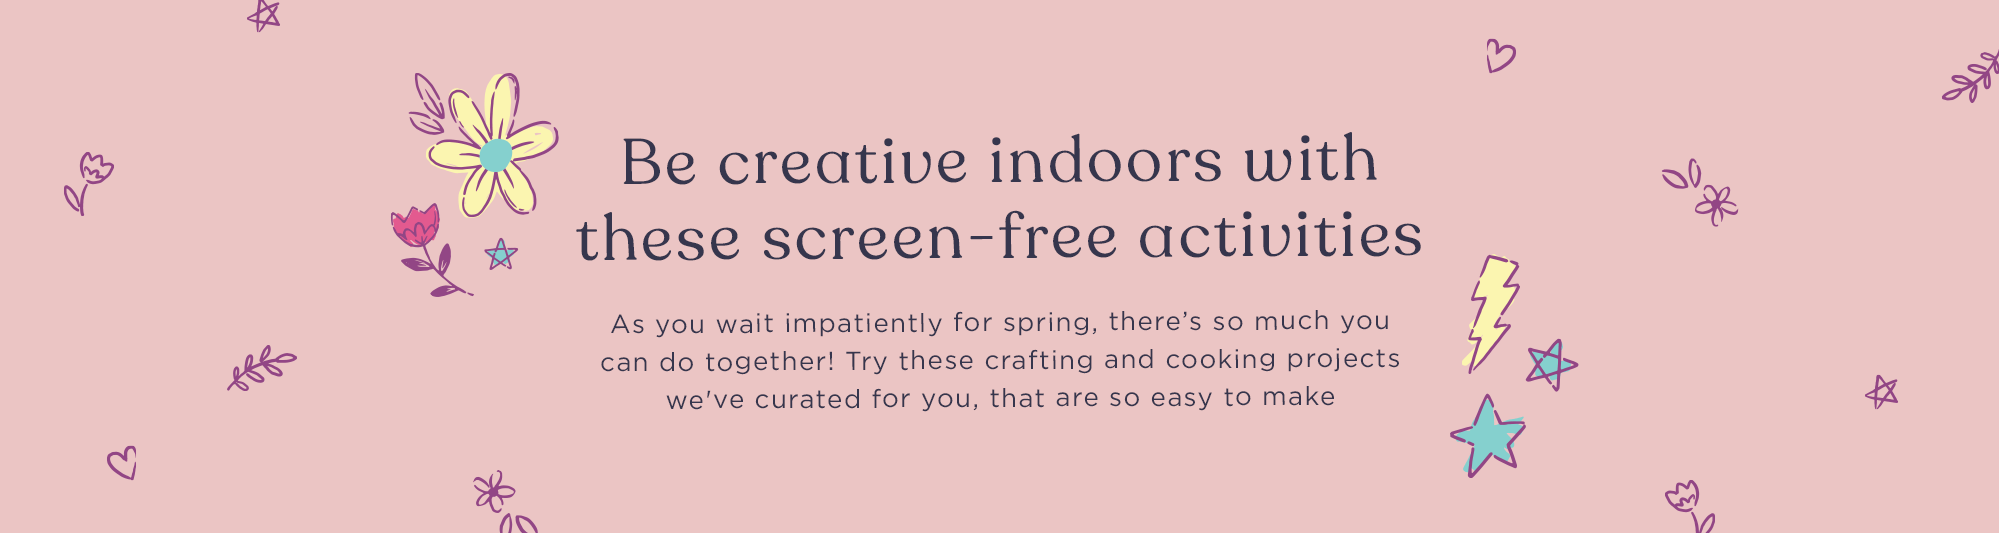 Be creative indoors with these screen-free activities